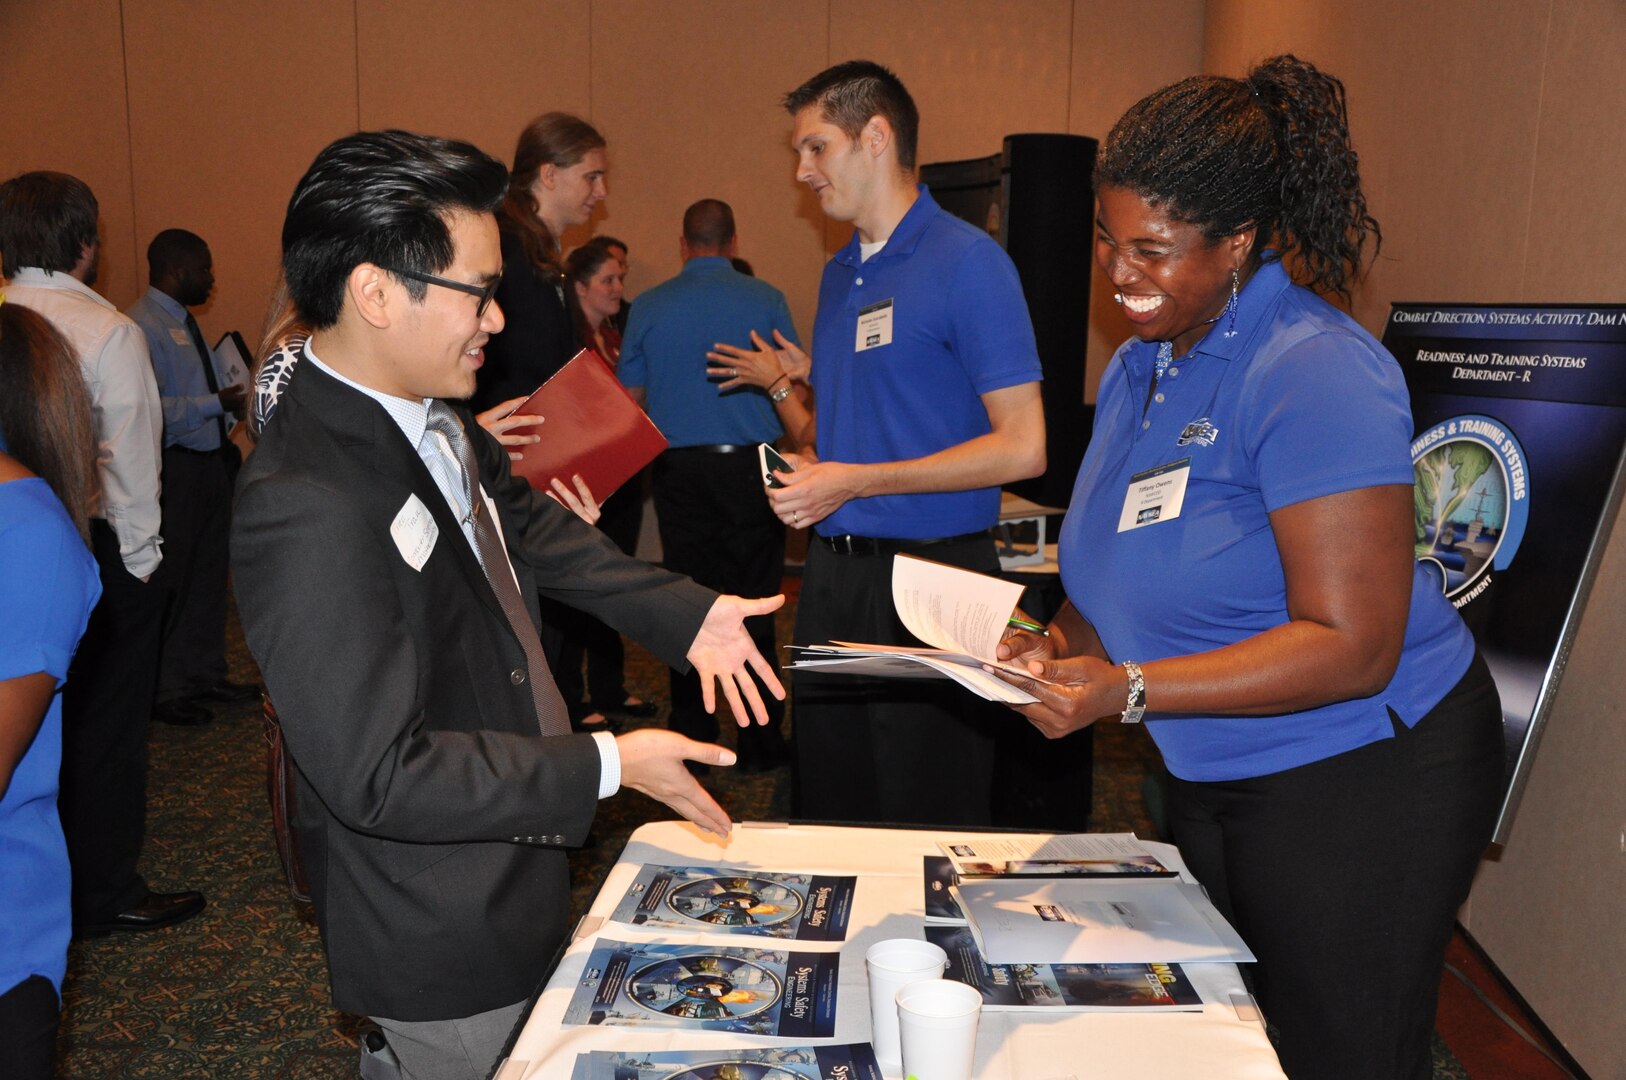 Tiffany Owens - employee of the Readiness & Training Systems Department at the Naval Surface Warfare Center Dahlgren Division (NSWCDD) - discusses career opportunities with a candidate at an NSWCDD job fair. The command's Human Resources Division announced Aug. 2 that it plans to make about 100 tentative job offers to candidates who attended the event. Approximately 325 candidates with bachelor's, master's, and doctoral degrees in biology, chemistry, computer science, engineering, mathematics, and physics spoke with senior Navy scientists, engineers, and managers about positions available for entry-level and experienced scientists and engineers.